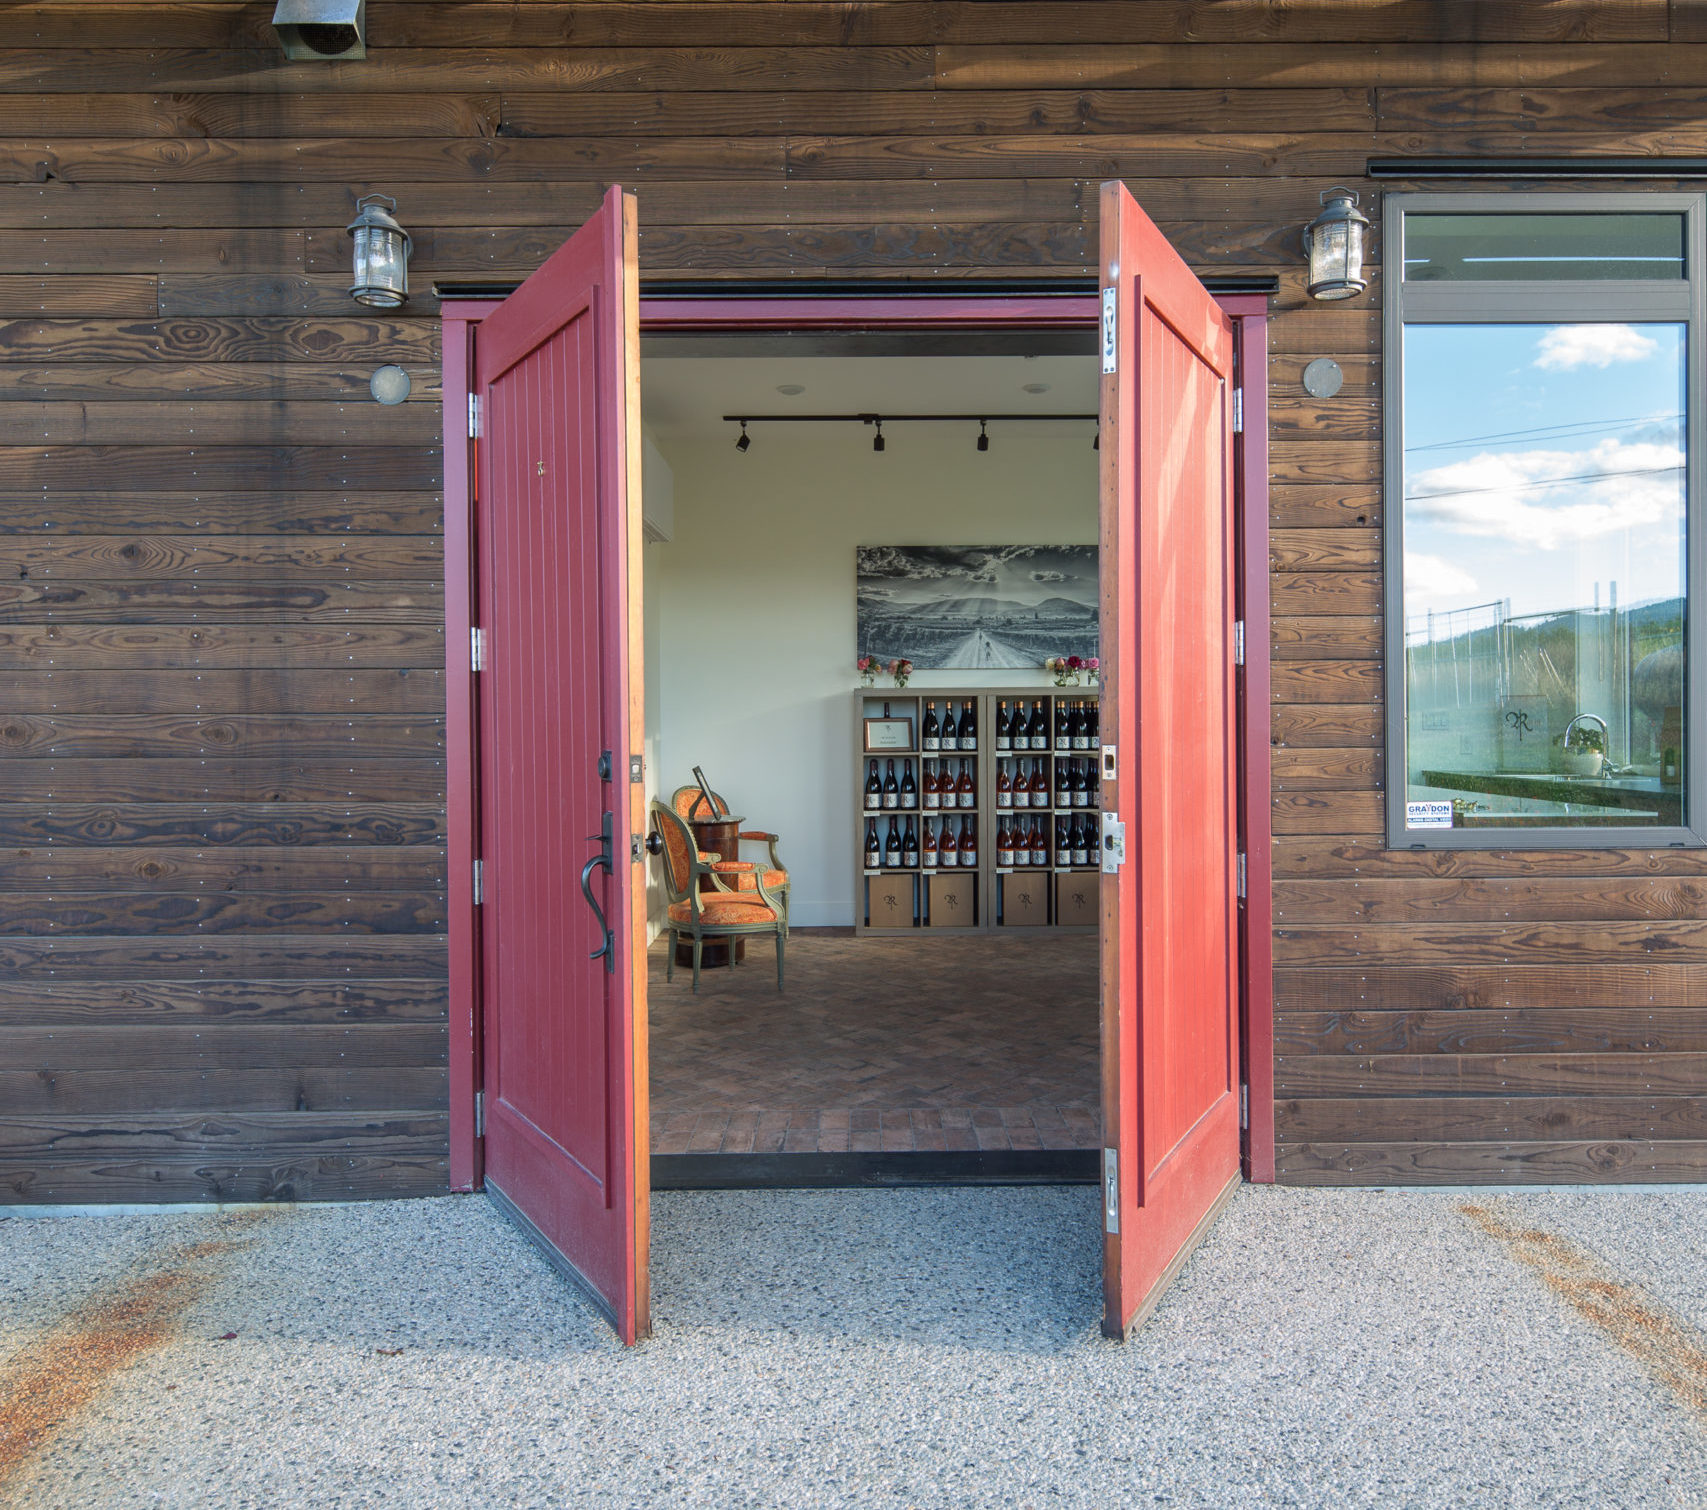 Red large barn style doors opening into the Roche Tasting room.